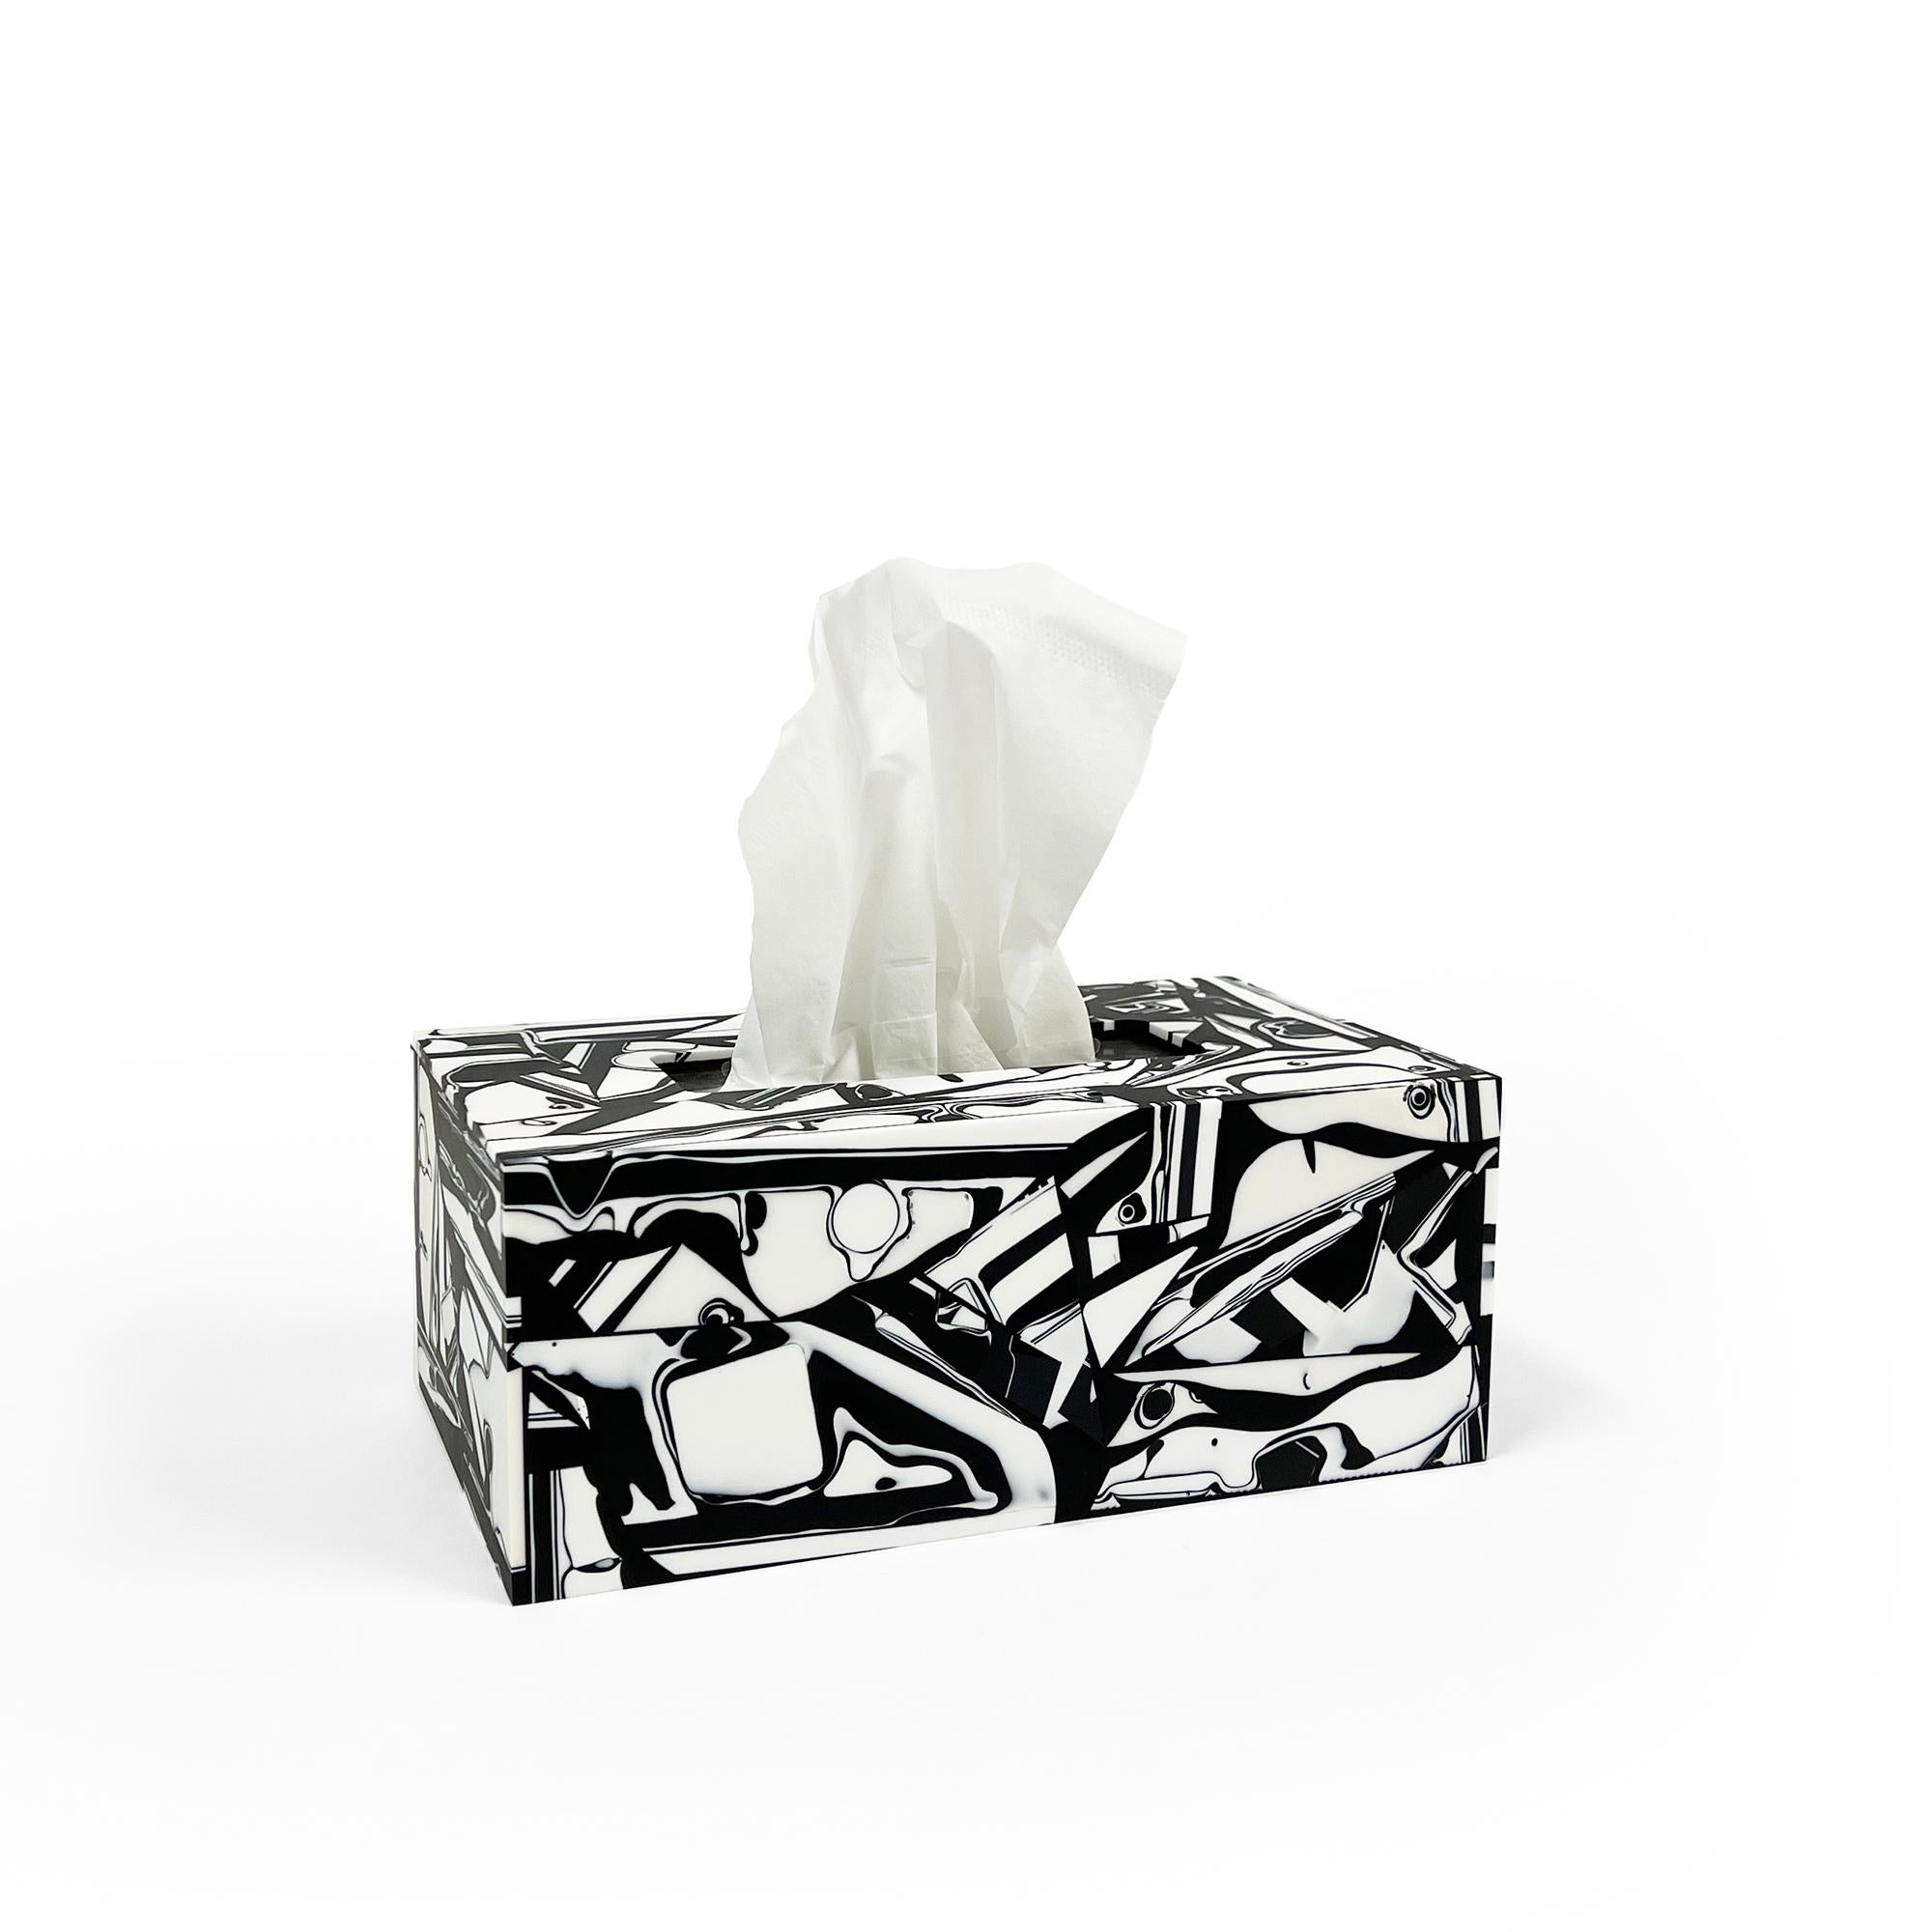 Cast Unique Contemporary Resin Black and White Tissue Box Cover by Elyse Graham For Sale